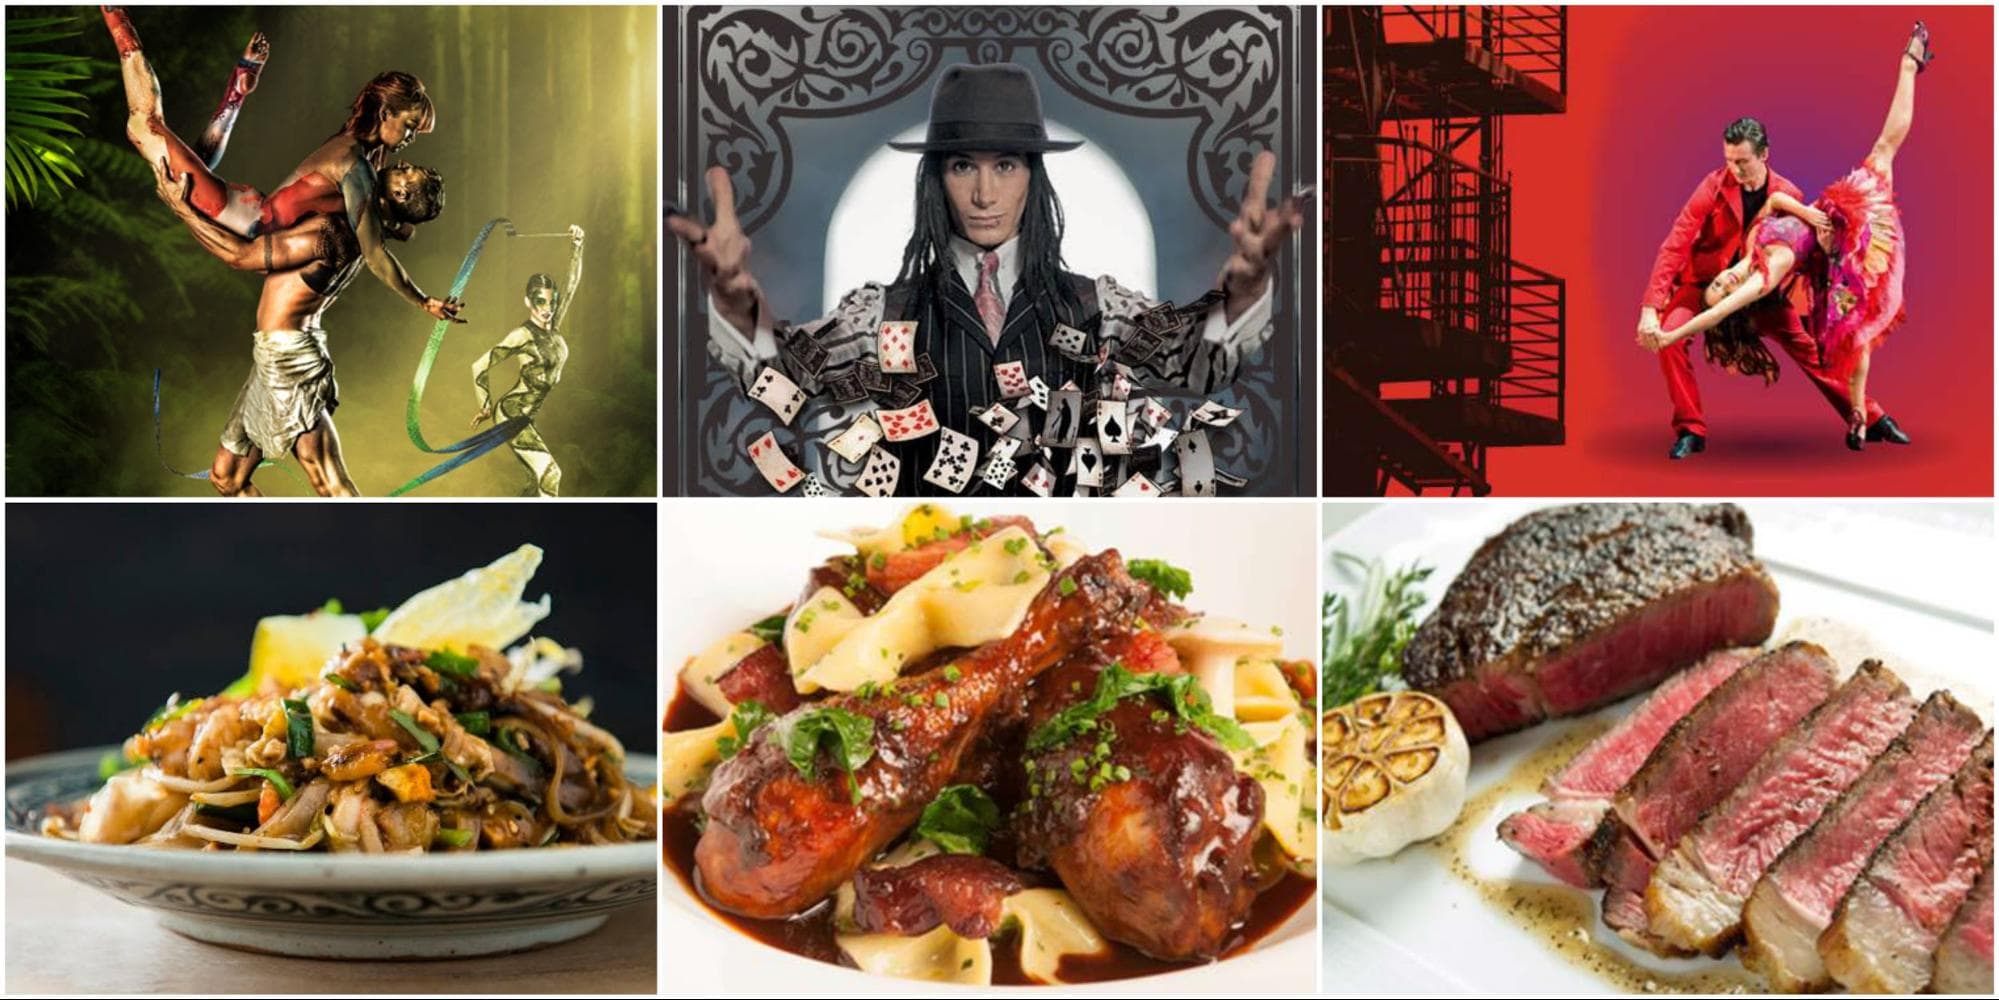 shows and restaurant collage